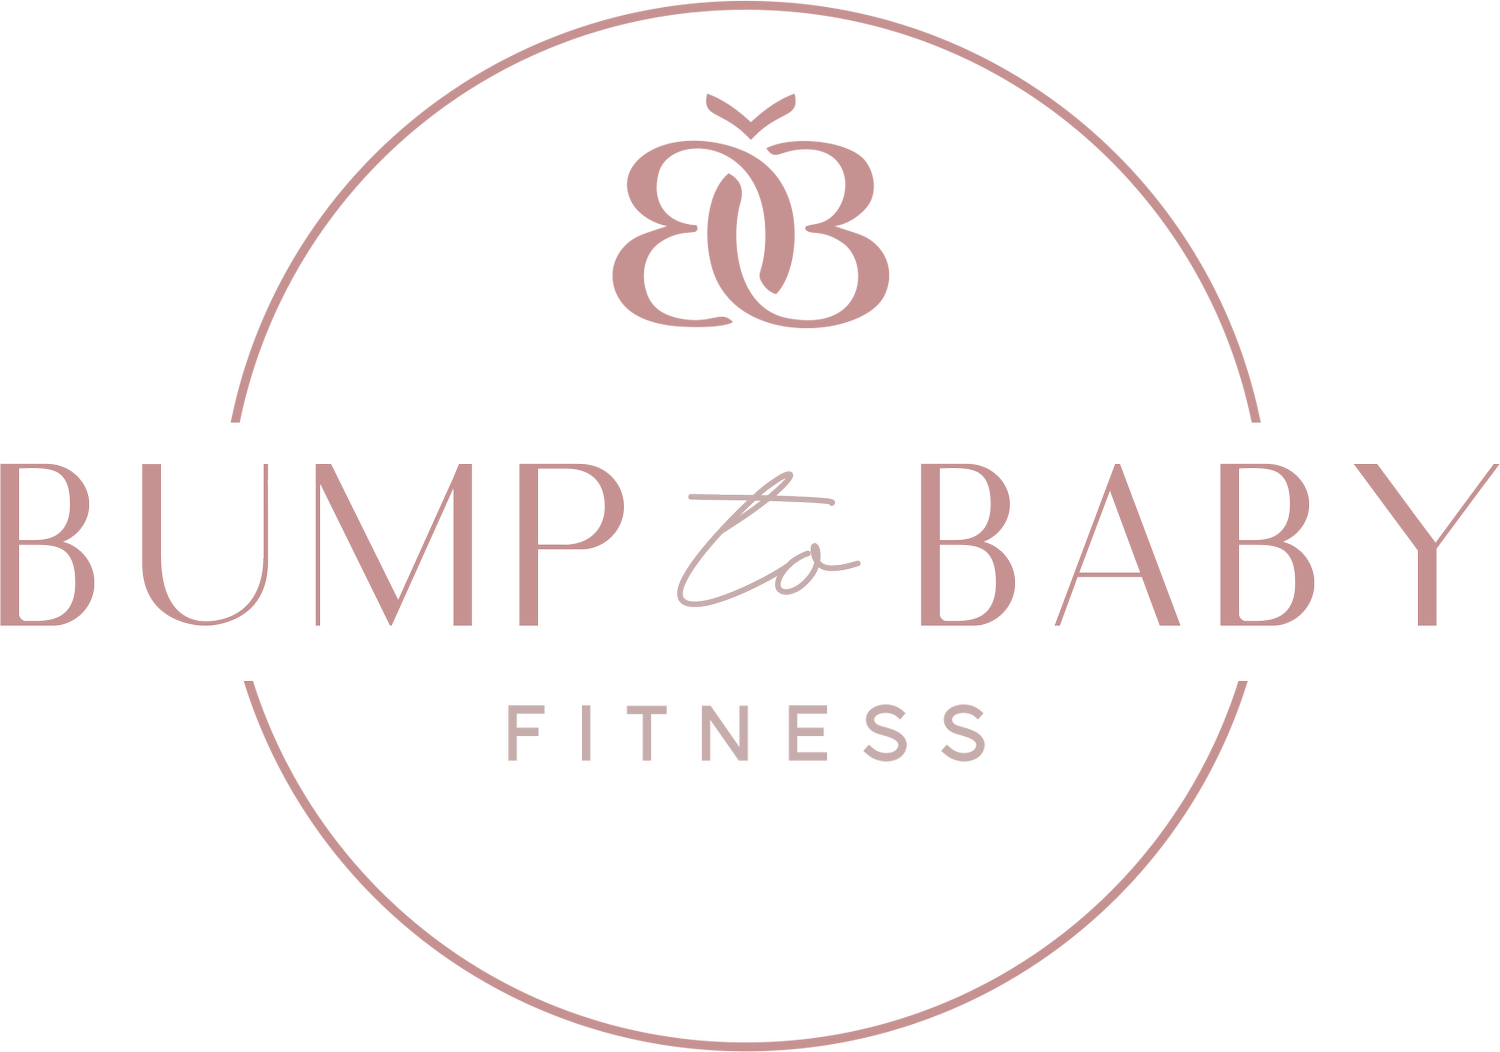 Bump to Baby Fitness